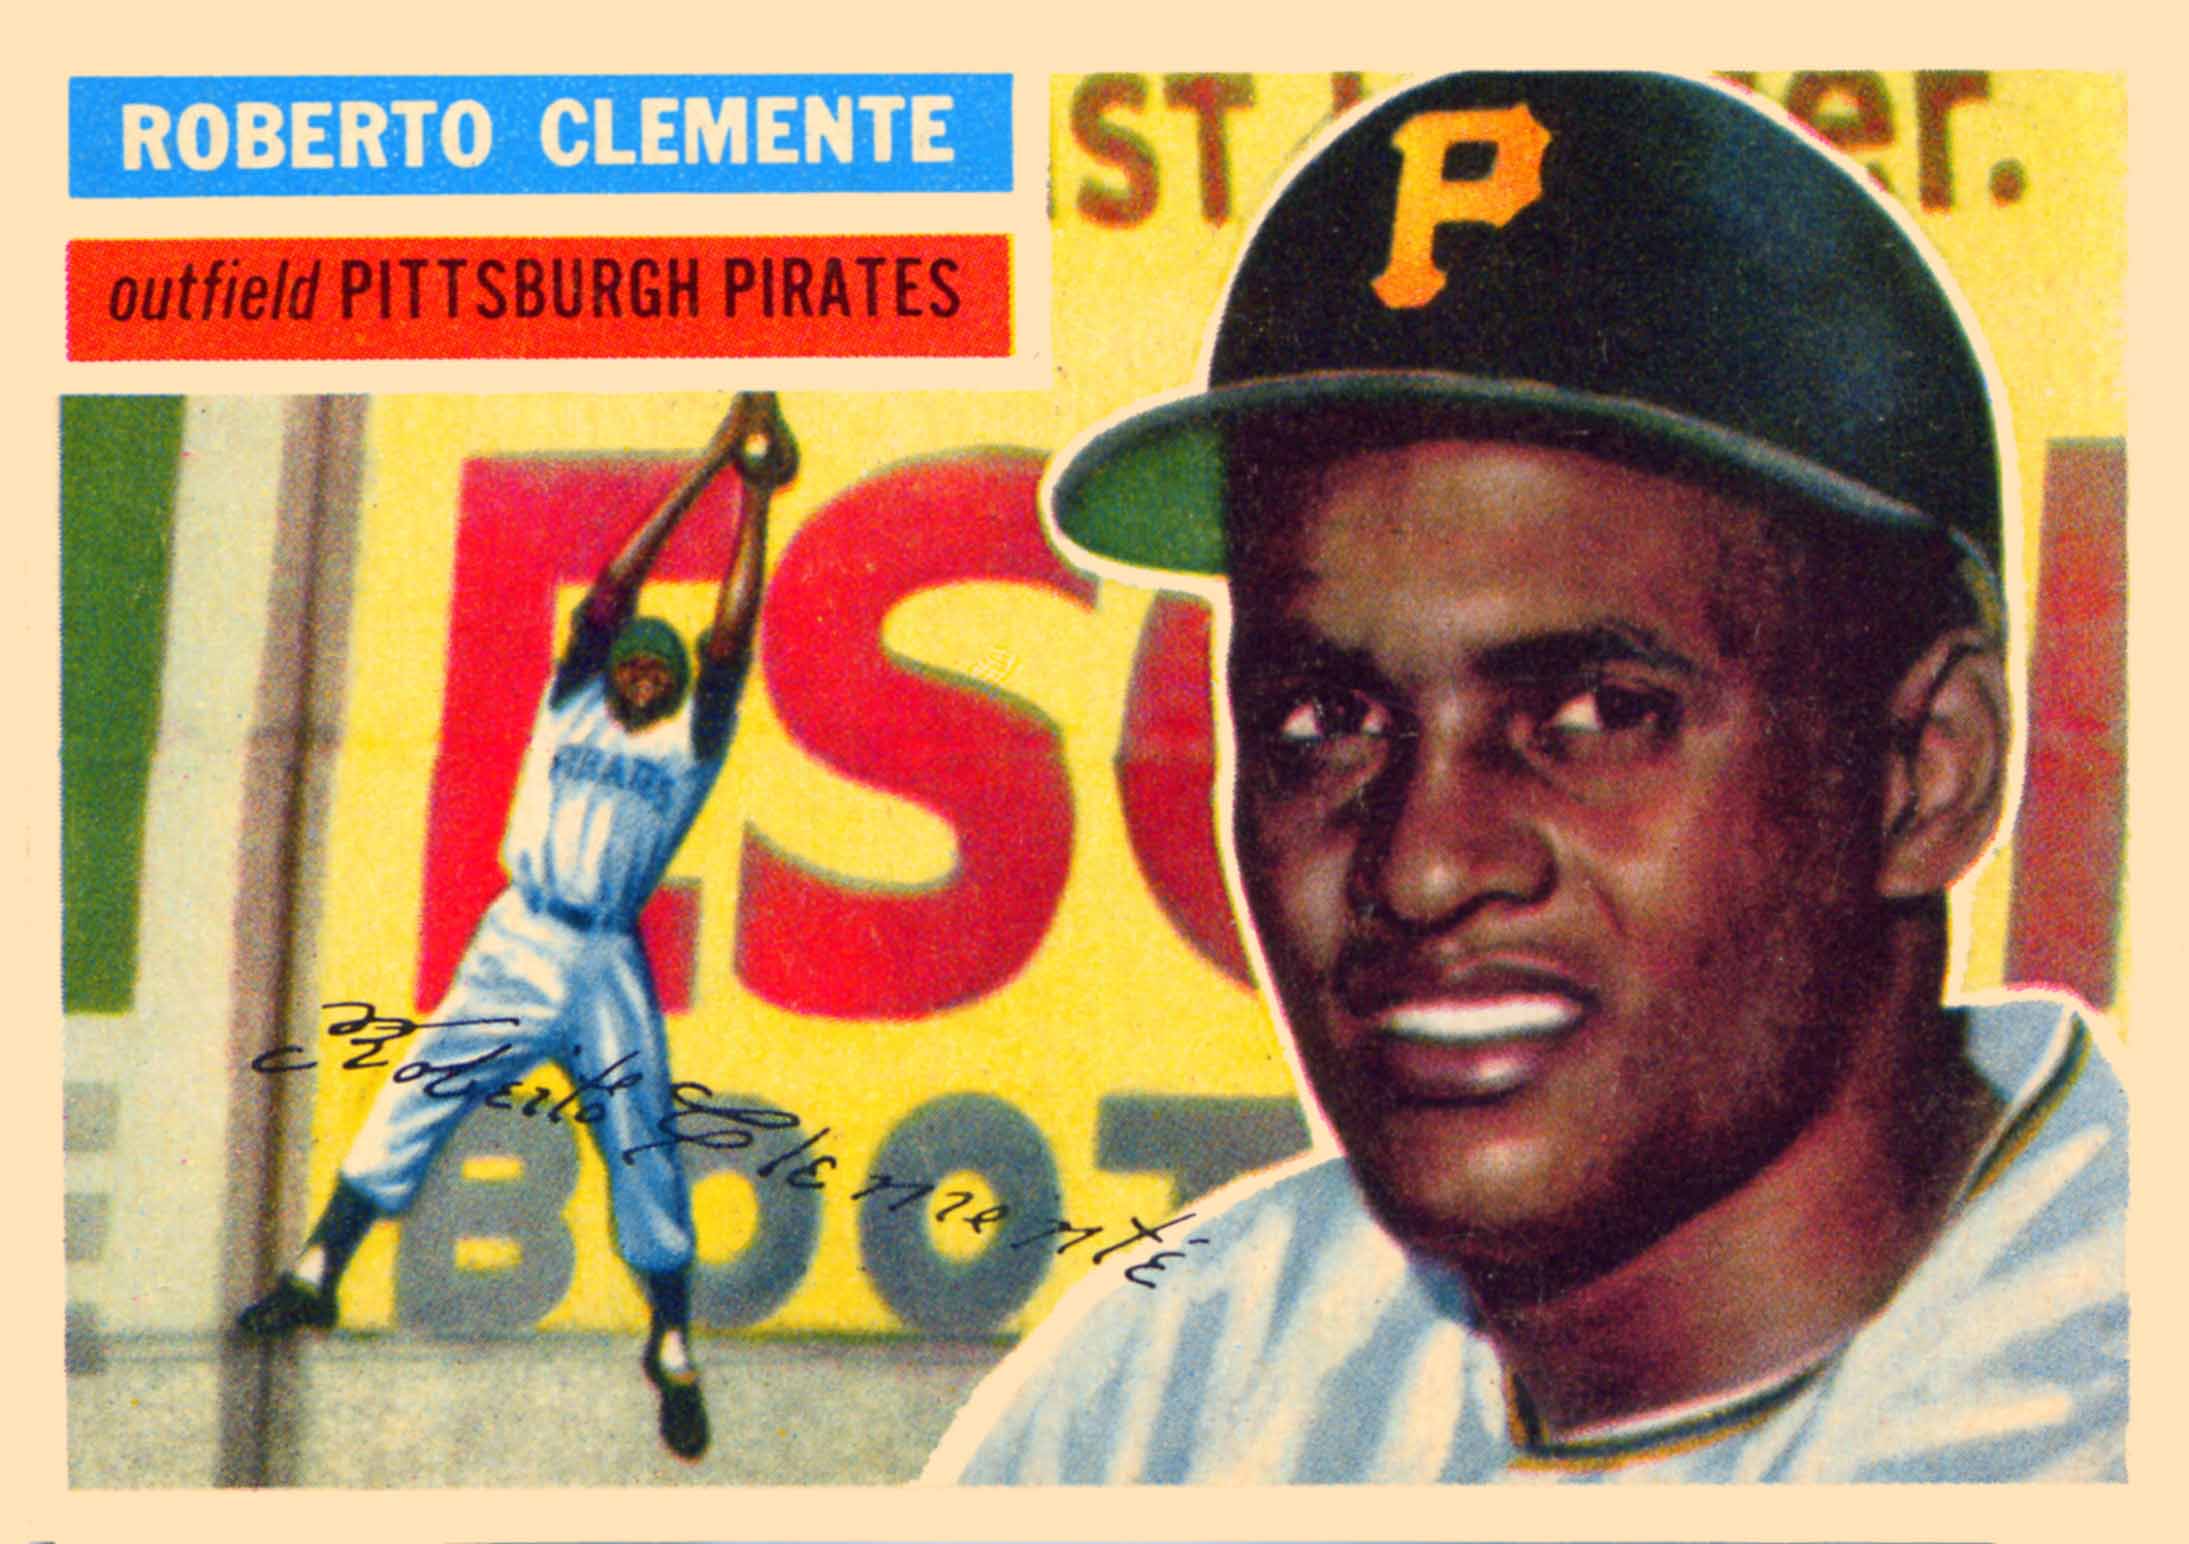 image For > Roberto Clemente